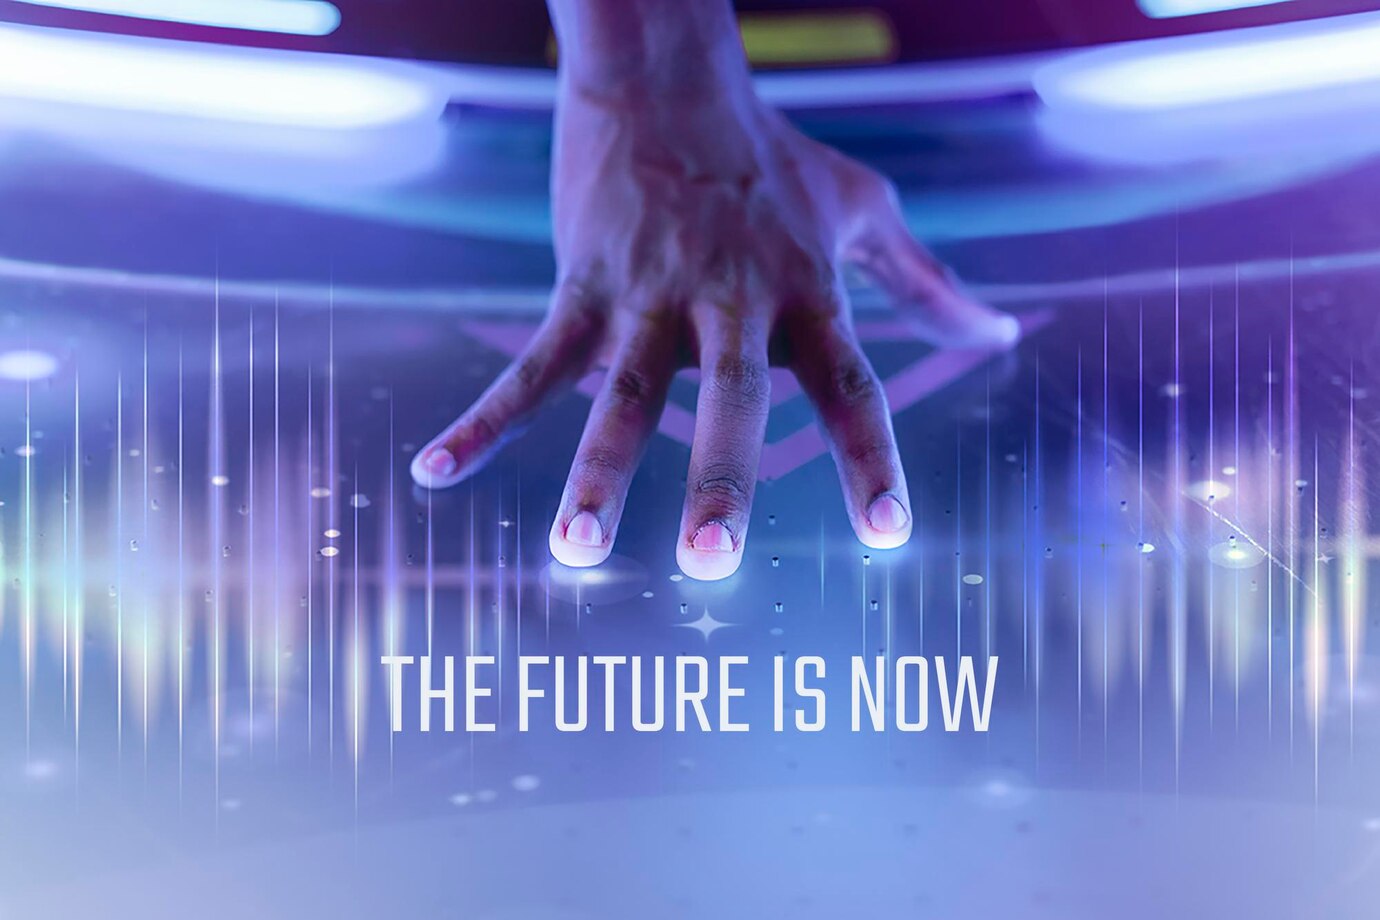 Into the Future: A Glimpse at Tomorrow’s Technology